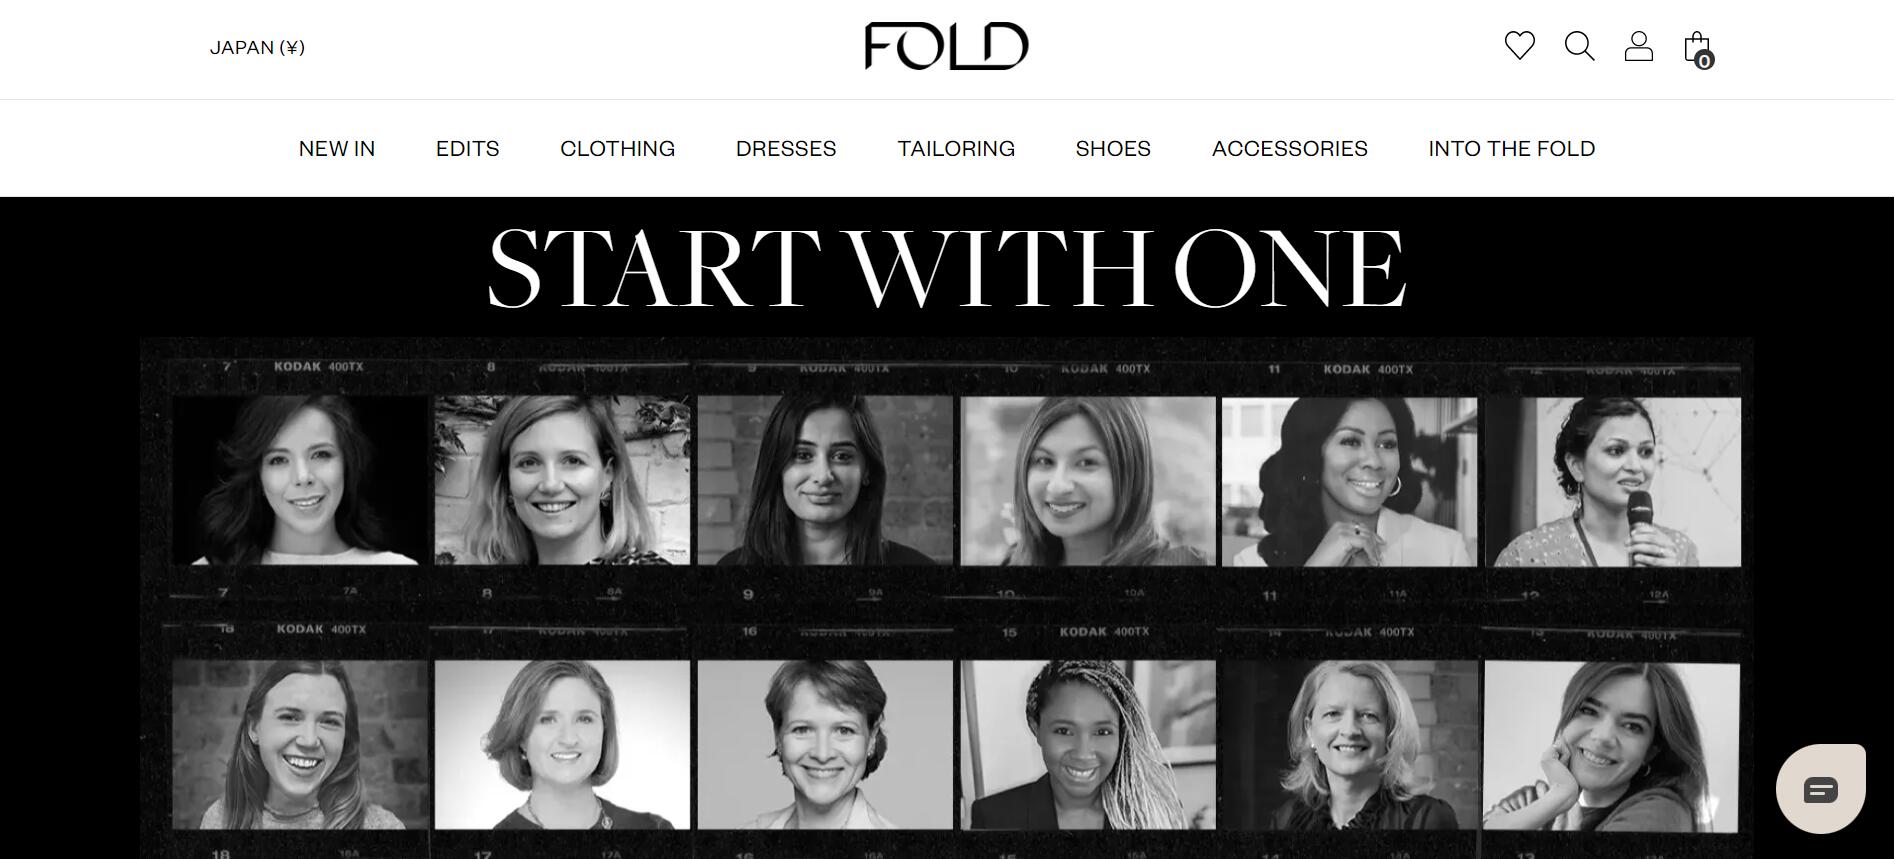 London Luxury Fashion Brand the Fold Raises £1.7 Million Through Crowdfunding, With Women Investors Accounting for Two-Thirds of the Total